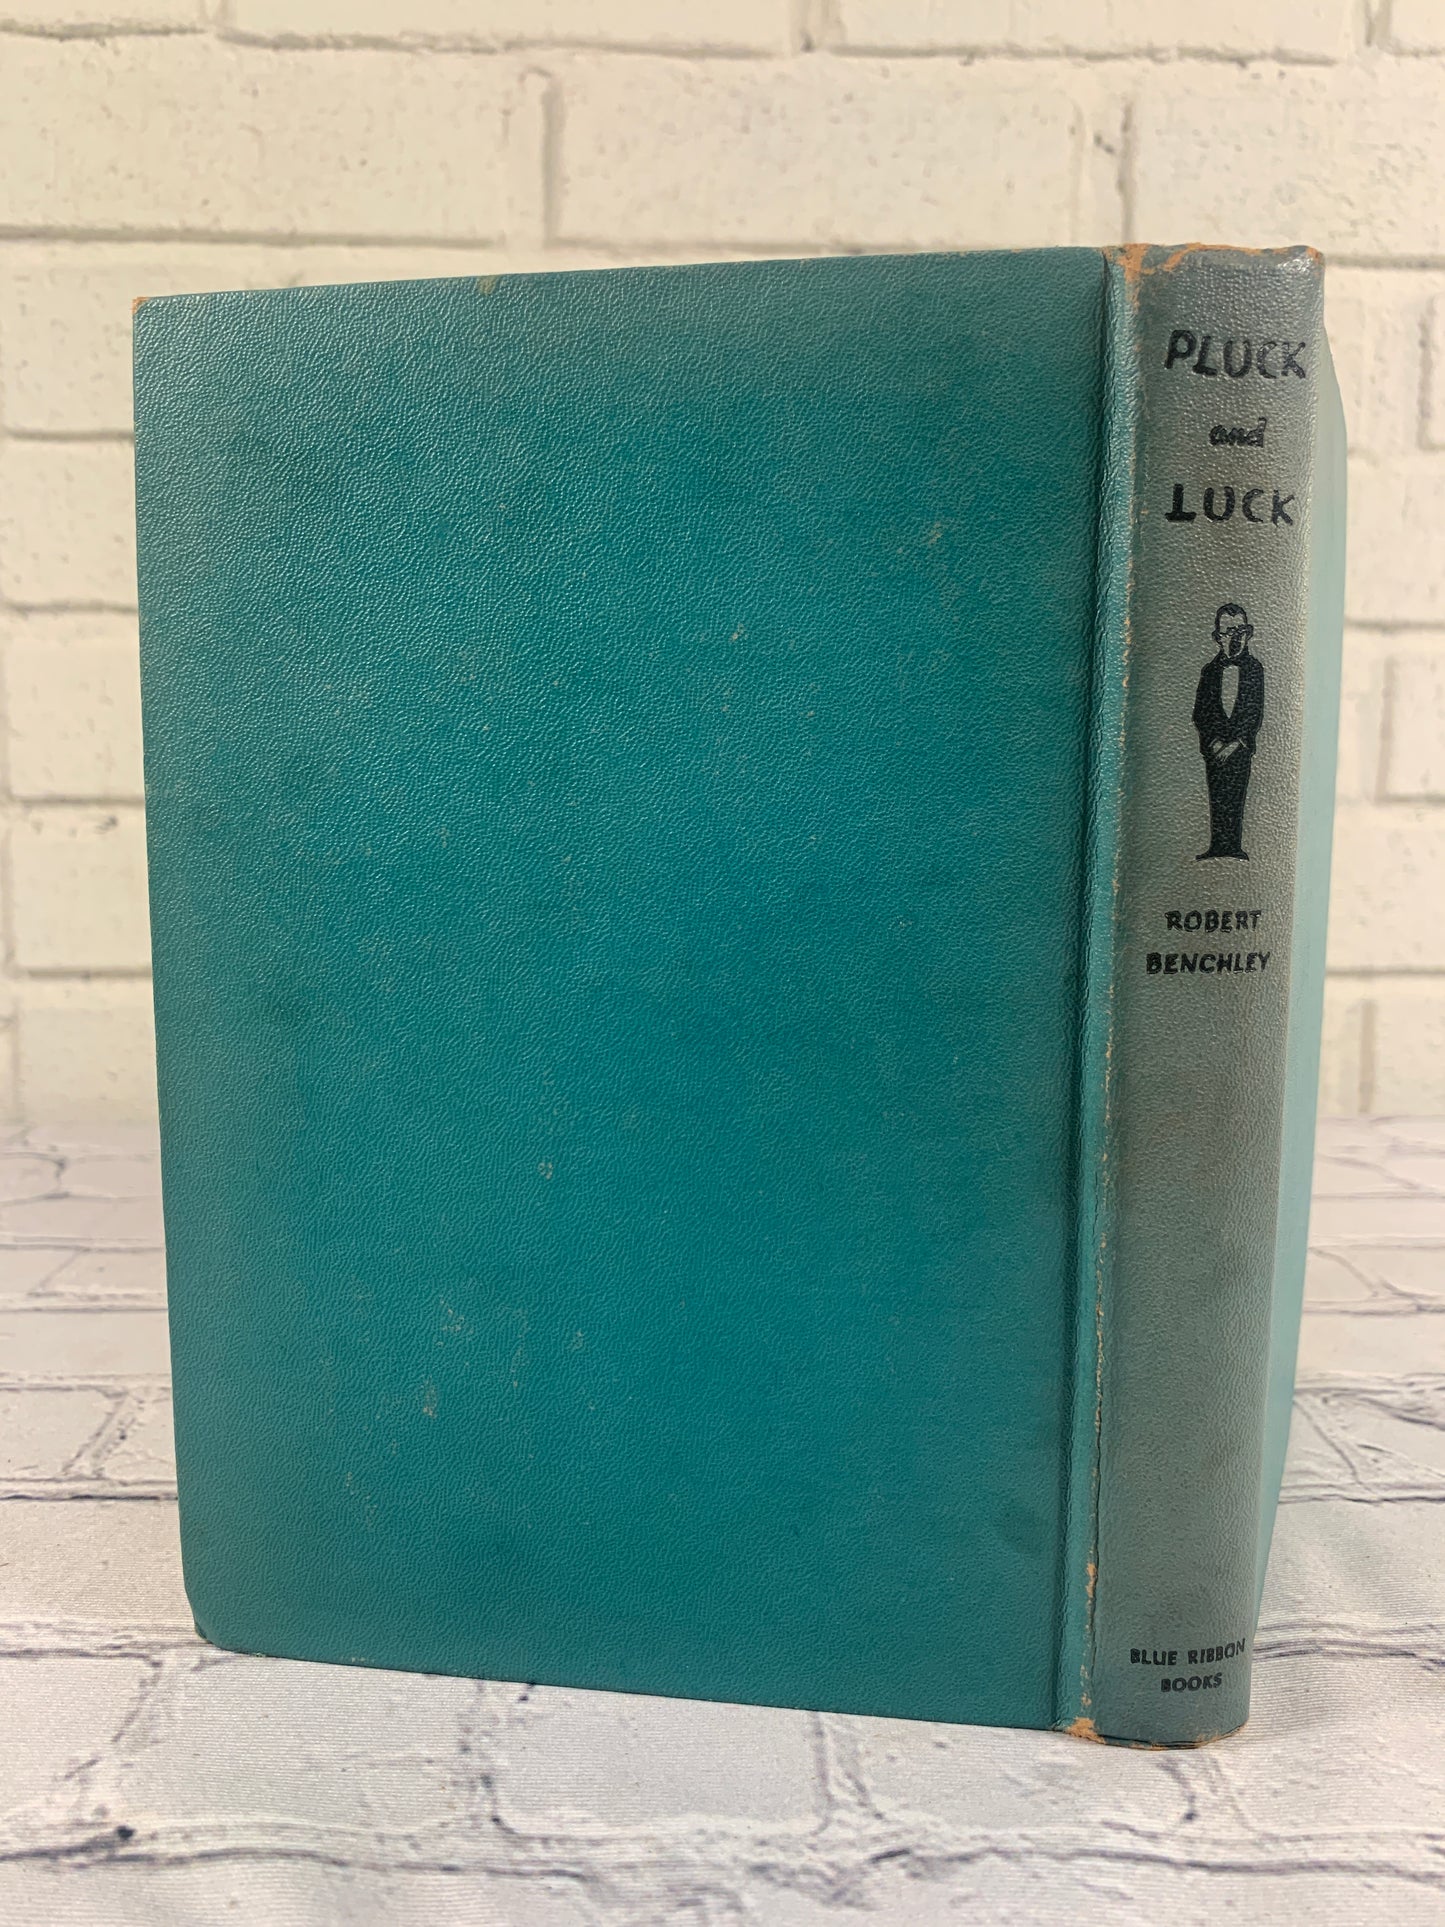 Pluck & Luck by Robert Benchley [1947]